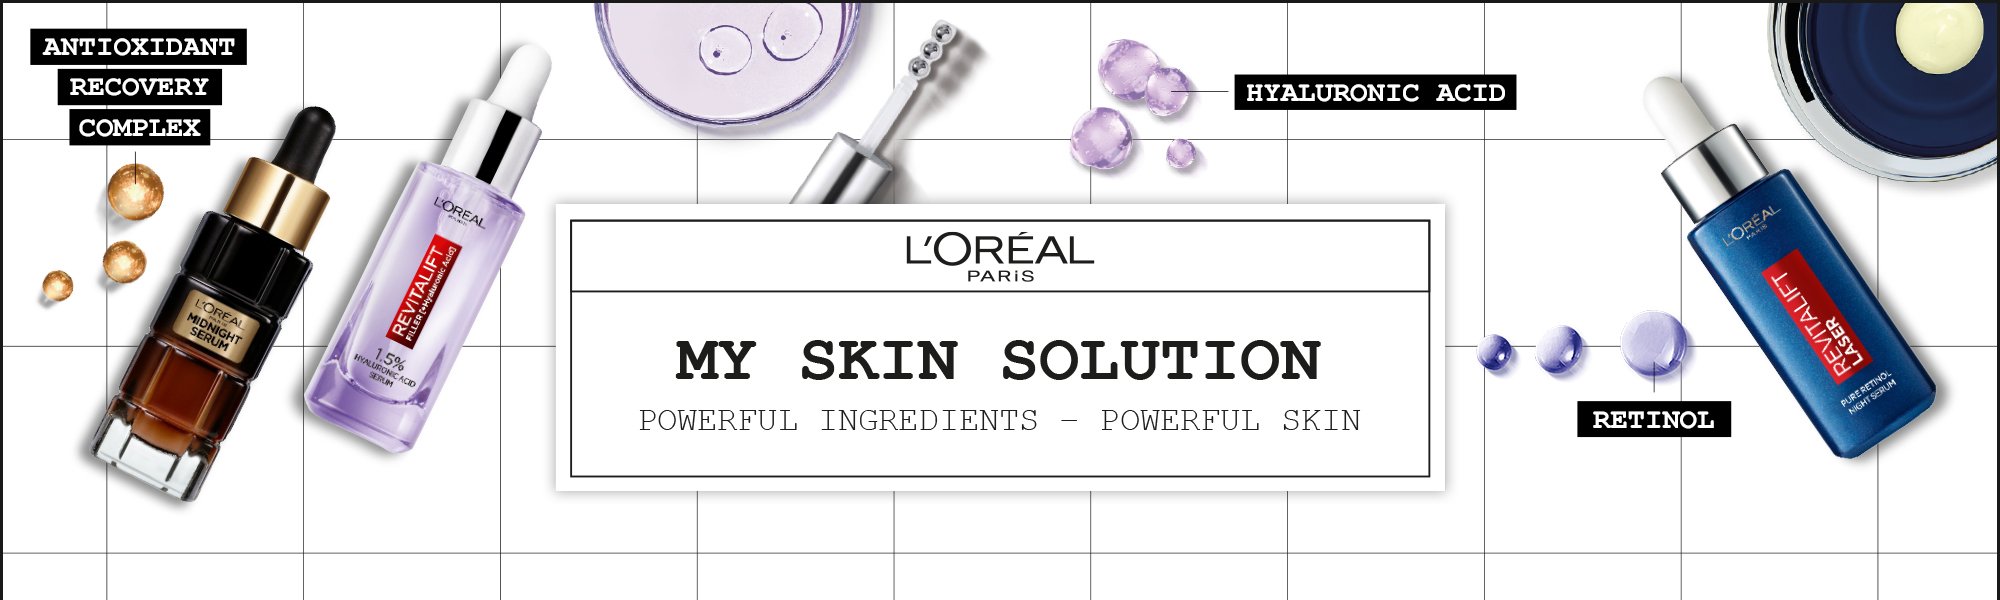 LOP NORDIC My Skin Solution Banner 2000x900px V2